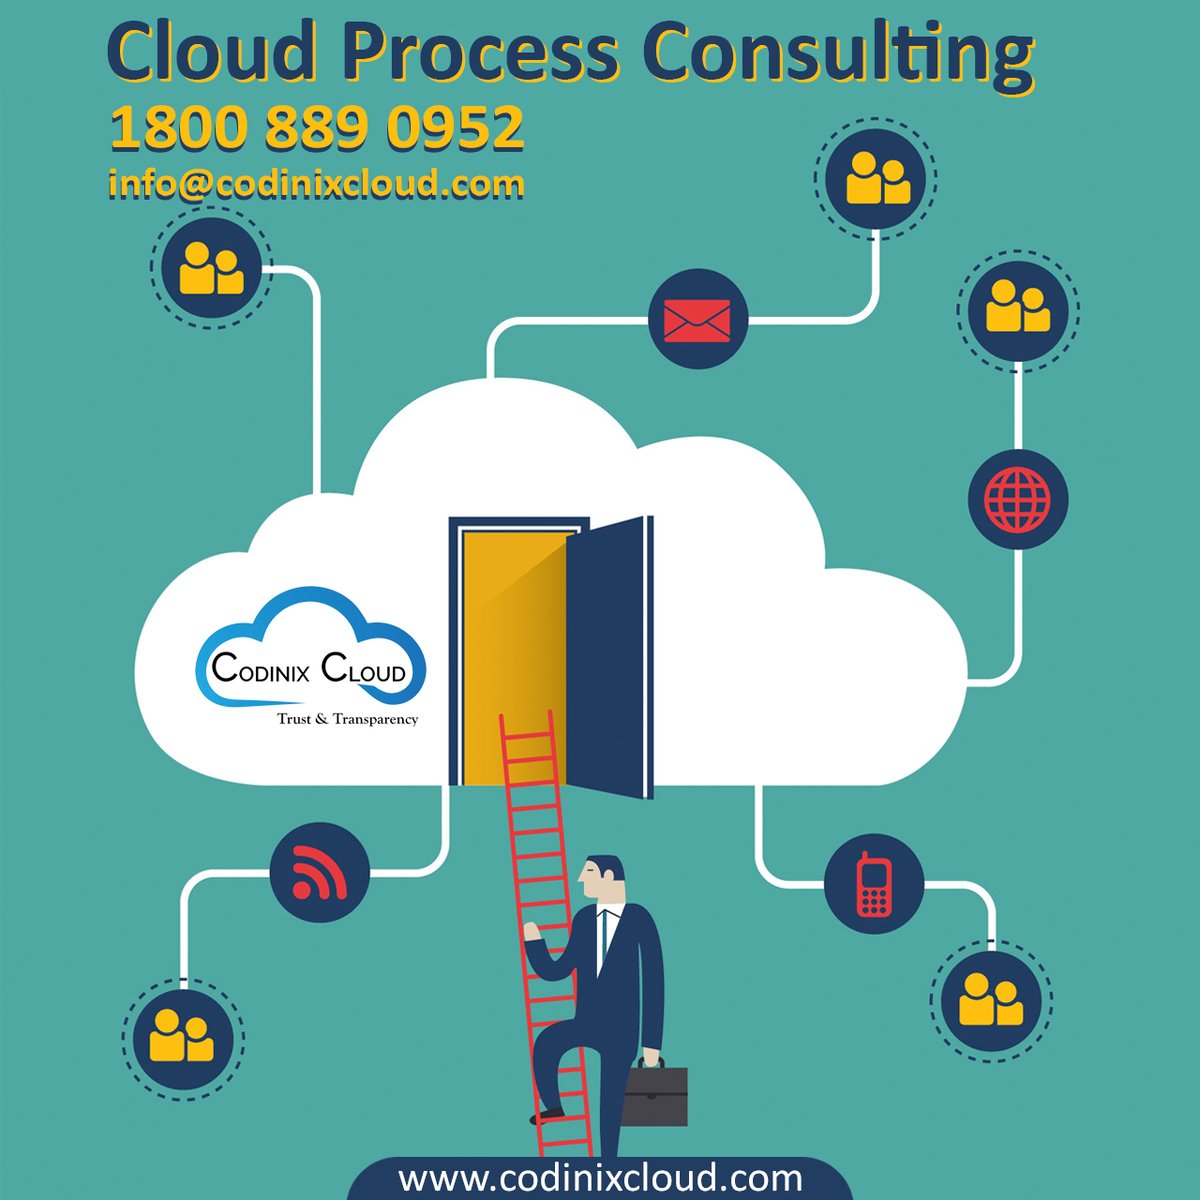 Cloud Process Consulting Solutions

codinixcloud.com/cloud-process-…

#cloudprocessconsulting #cloudprocessconsultants #cloudconsulting #salesforceservices #digitaltransformation #cloudbasedsolutions #businessactivities #topnotchservices #streamlinebusiness #teamofexperts